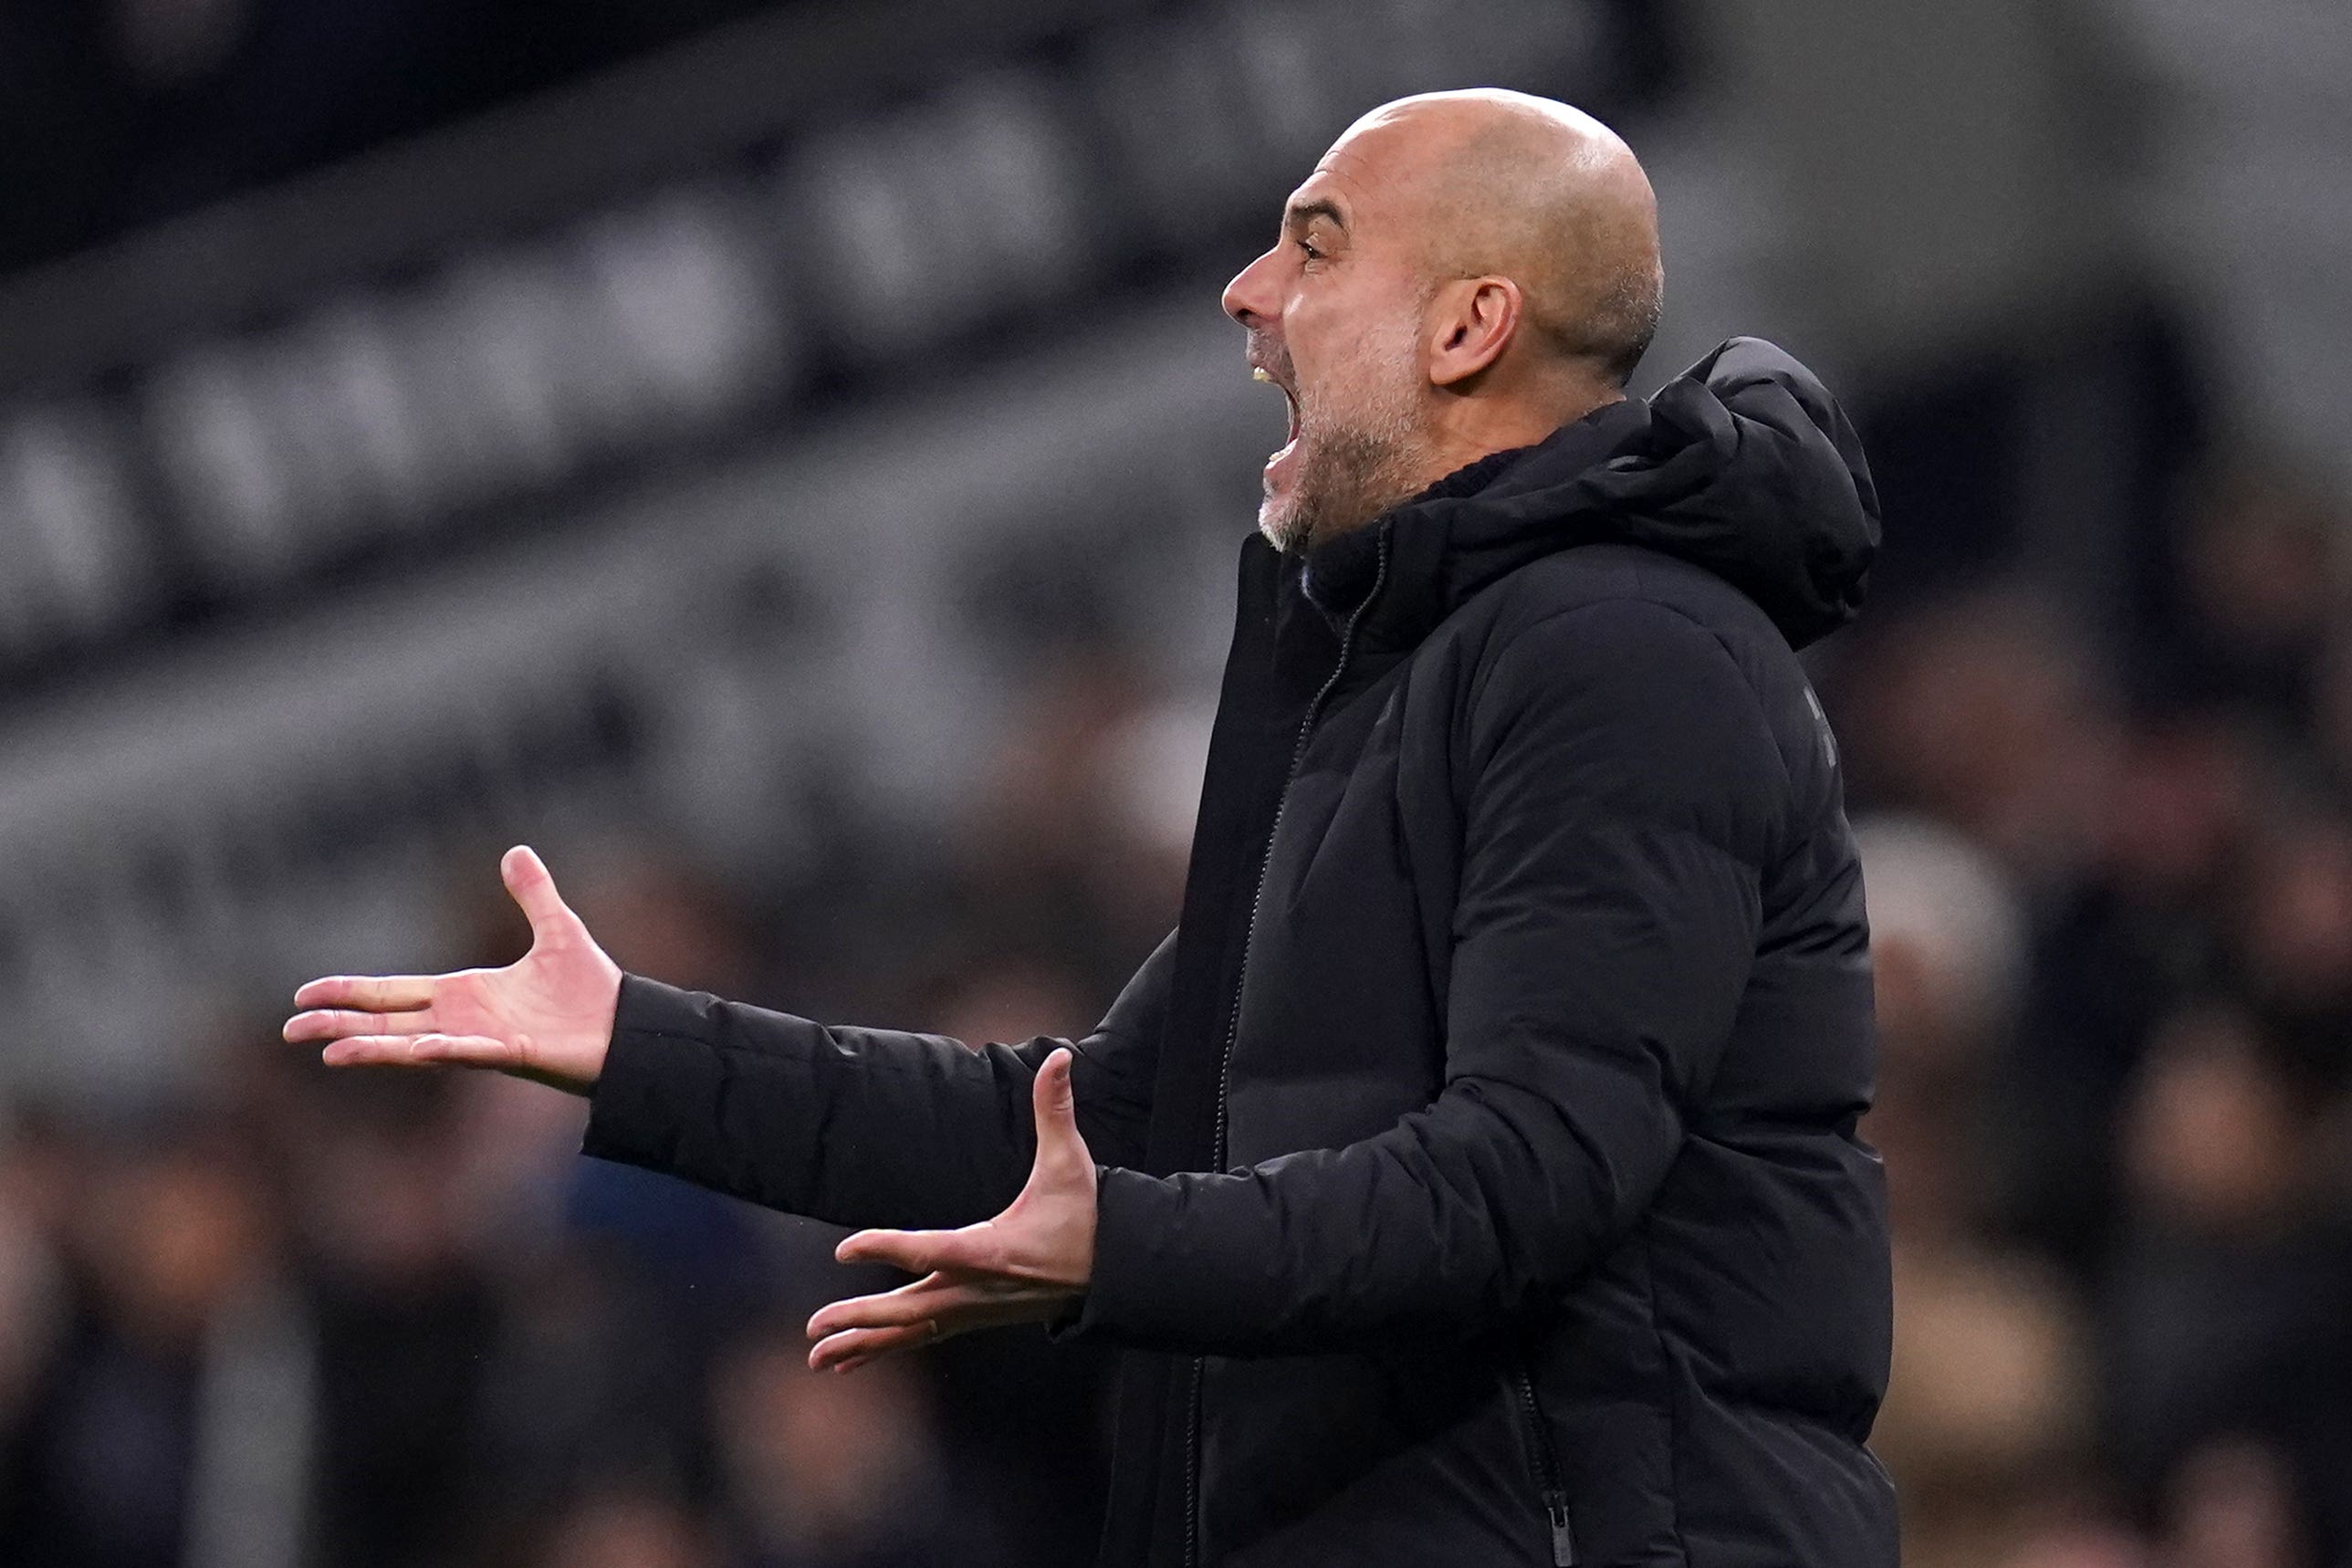 Pep Guardiola felt Manchester City missed an opportunity in losing to Tottenham (John Walton/PA)